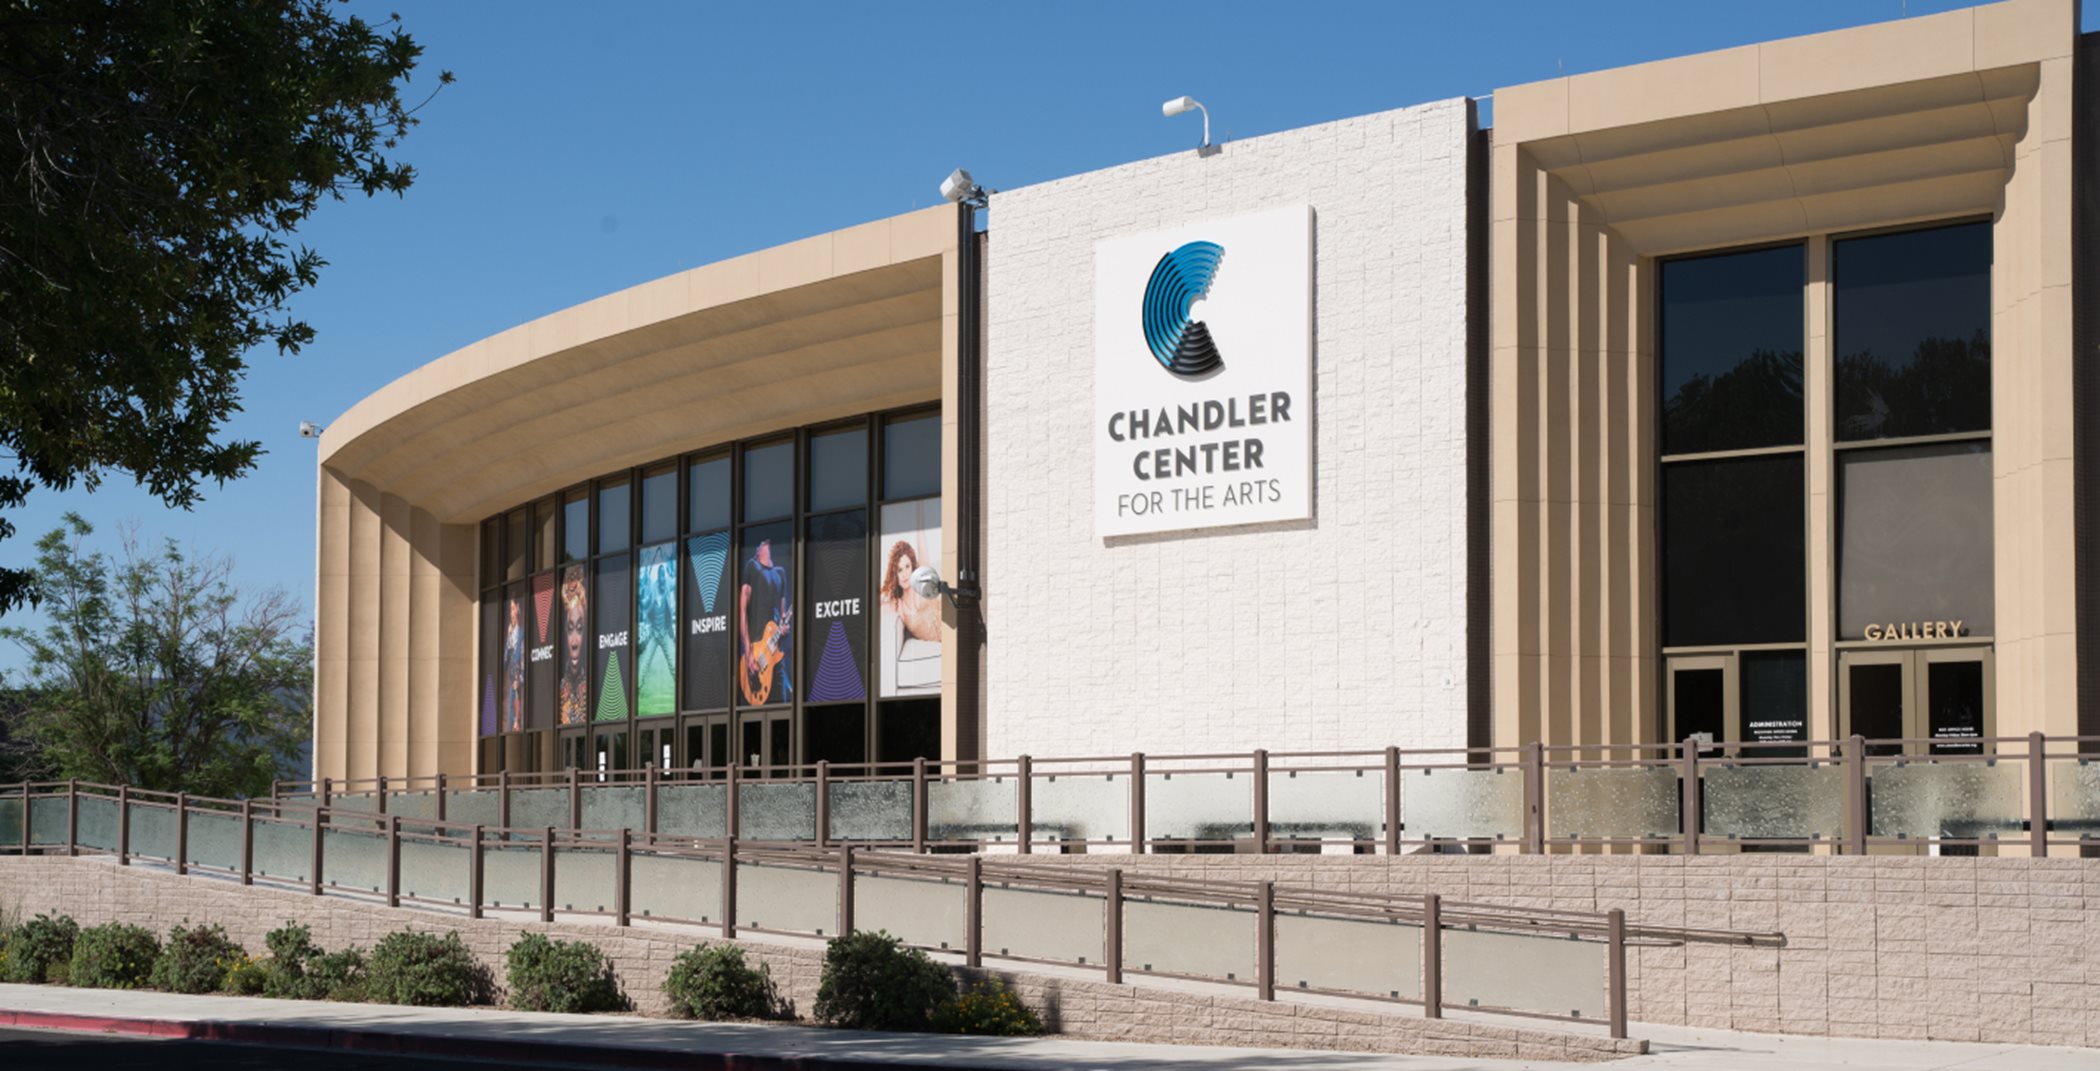 Entrance to the Chandler Center for the Arts, which is a long, rounded building with large glass windows.